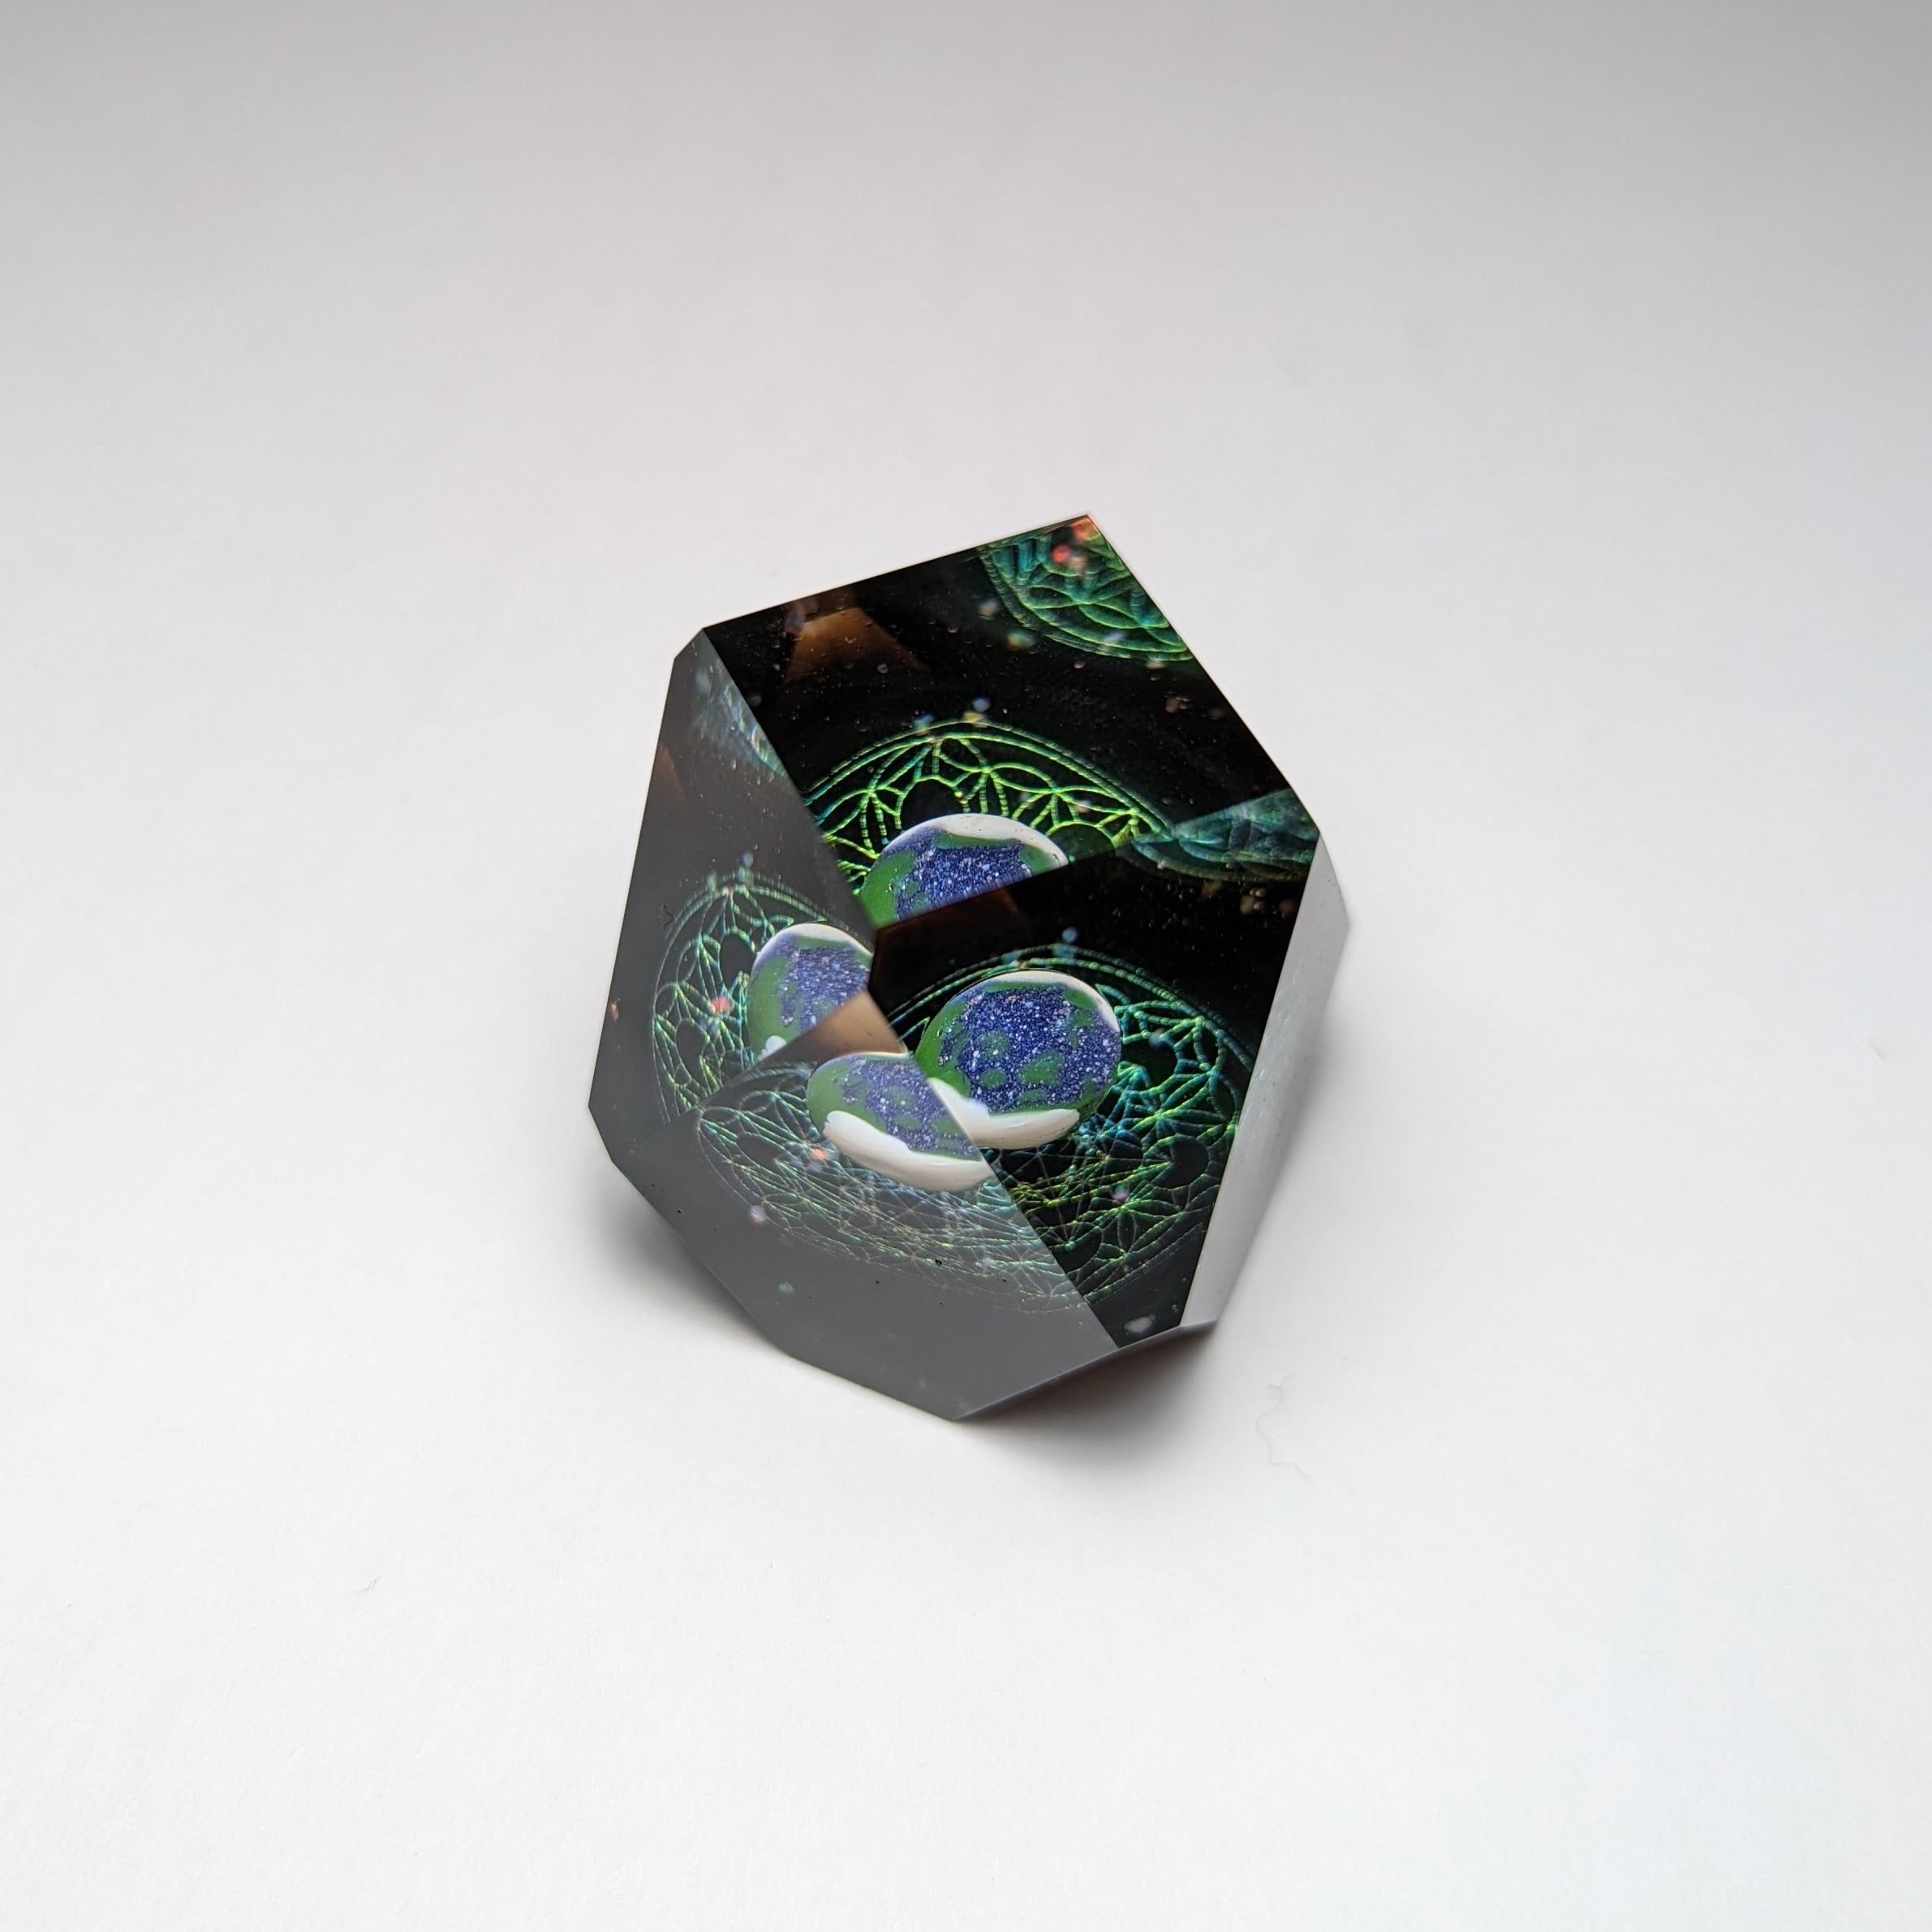 Jes Durfee x Josh Arleth Faceted Planetary Paperweight